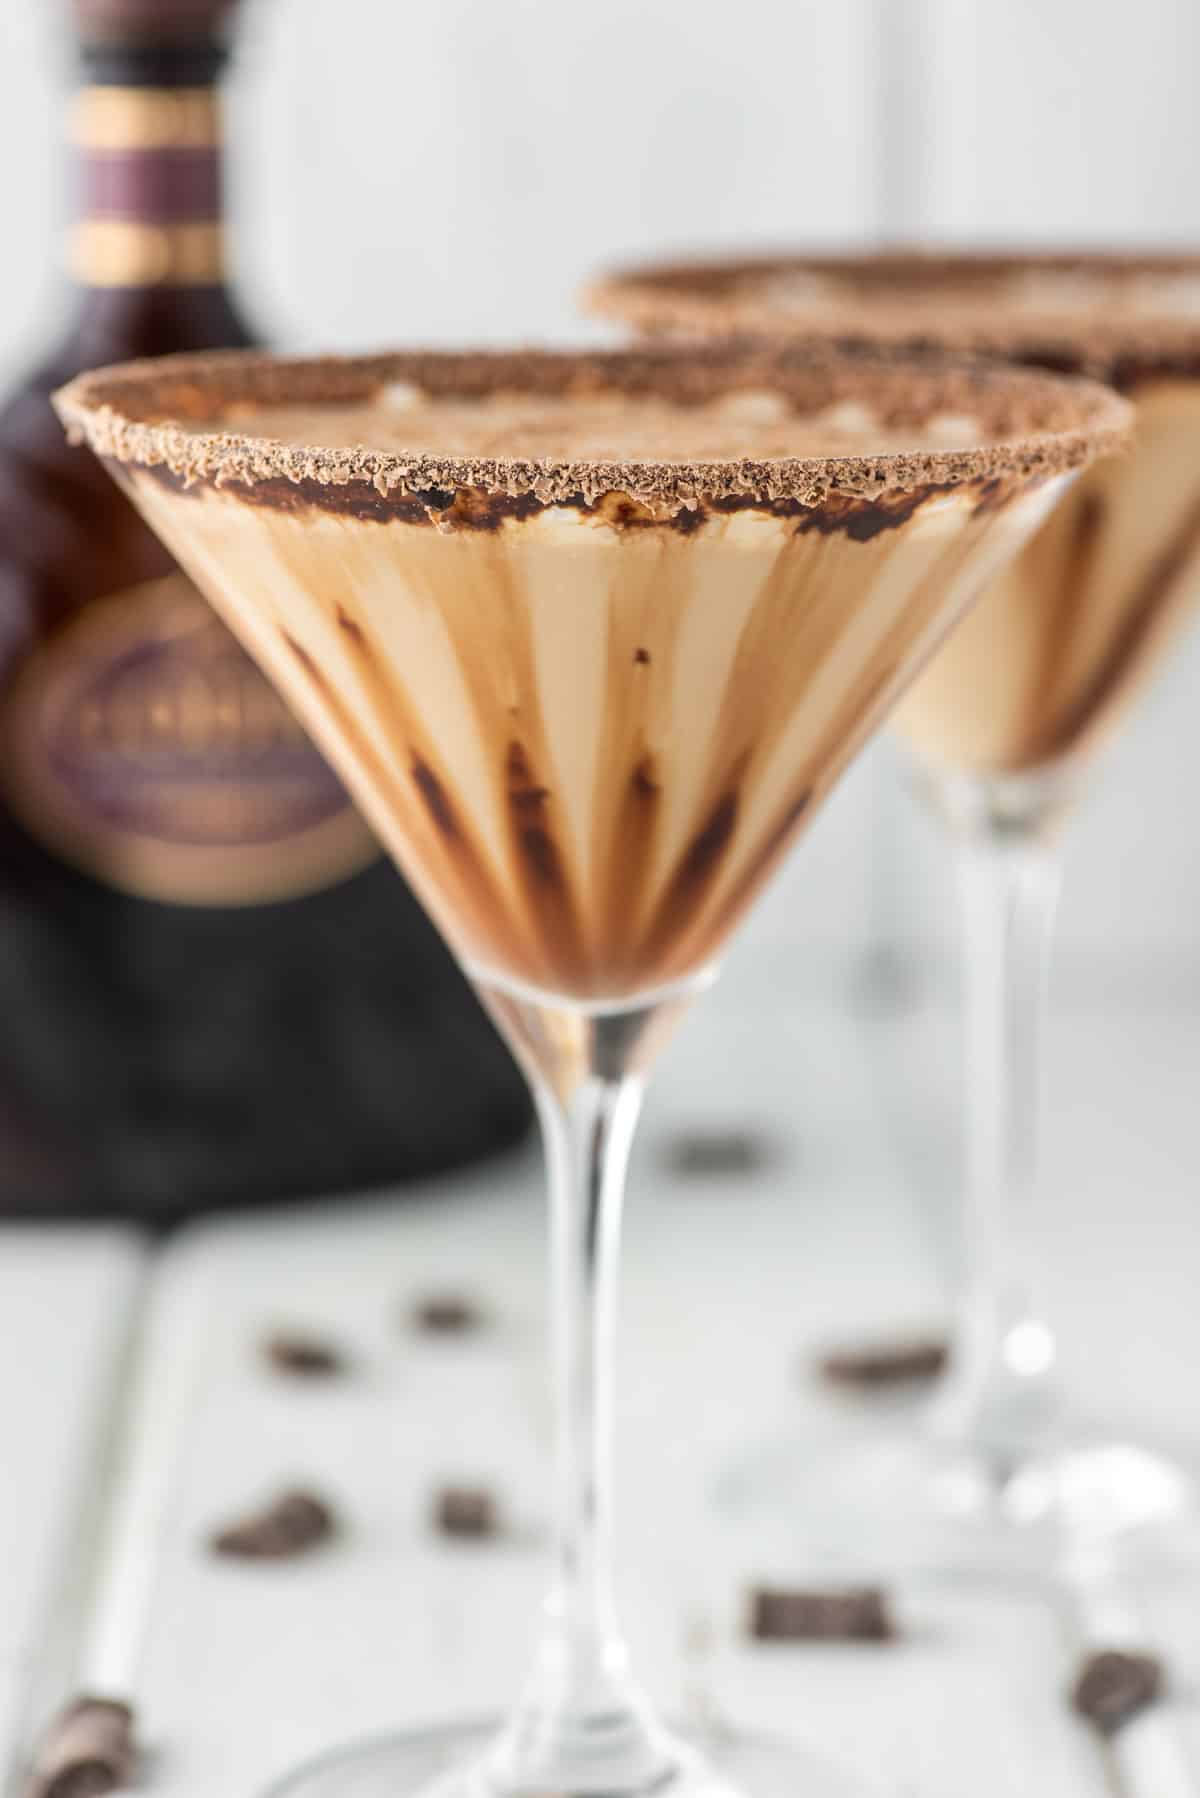 two glasses of Godiva chocolate martinis with Godiva liqueur in the background